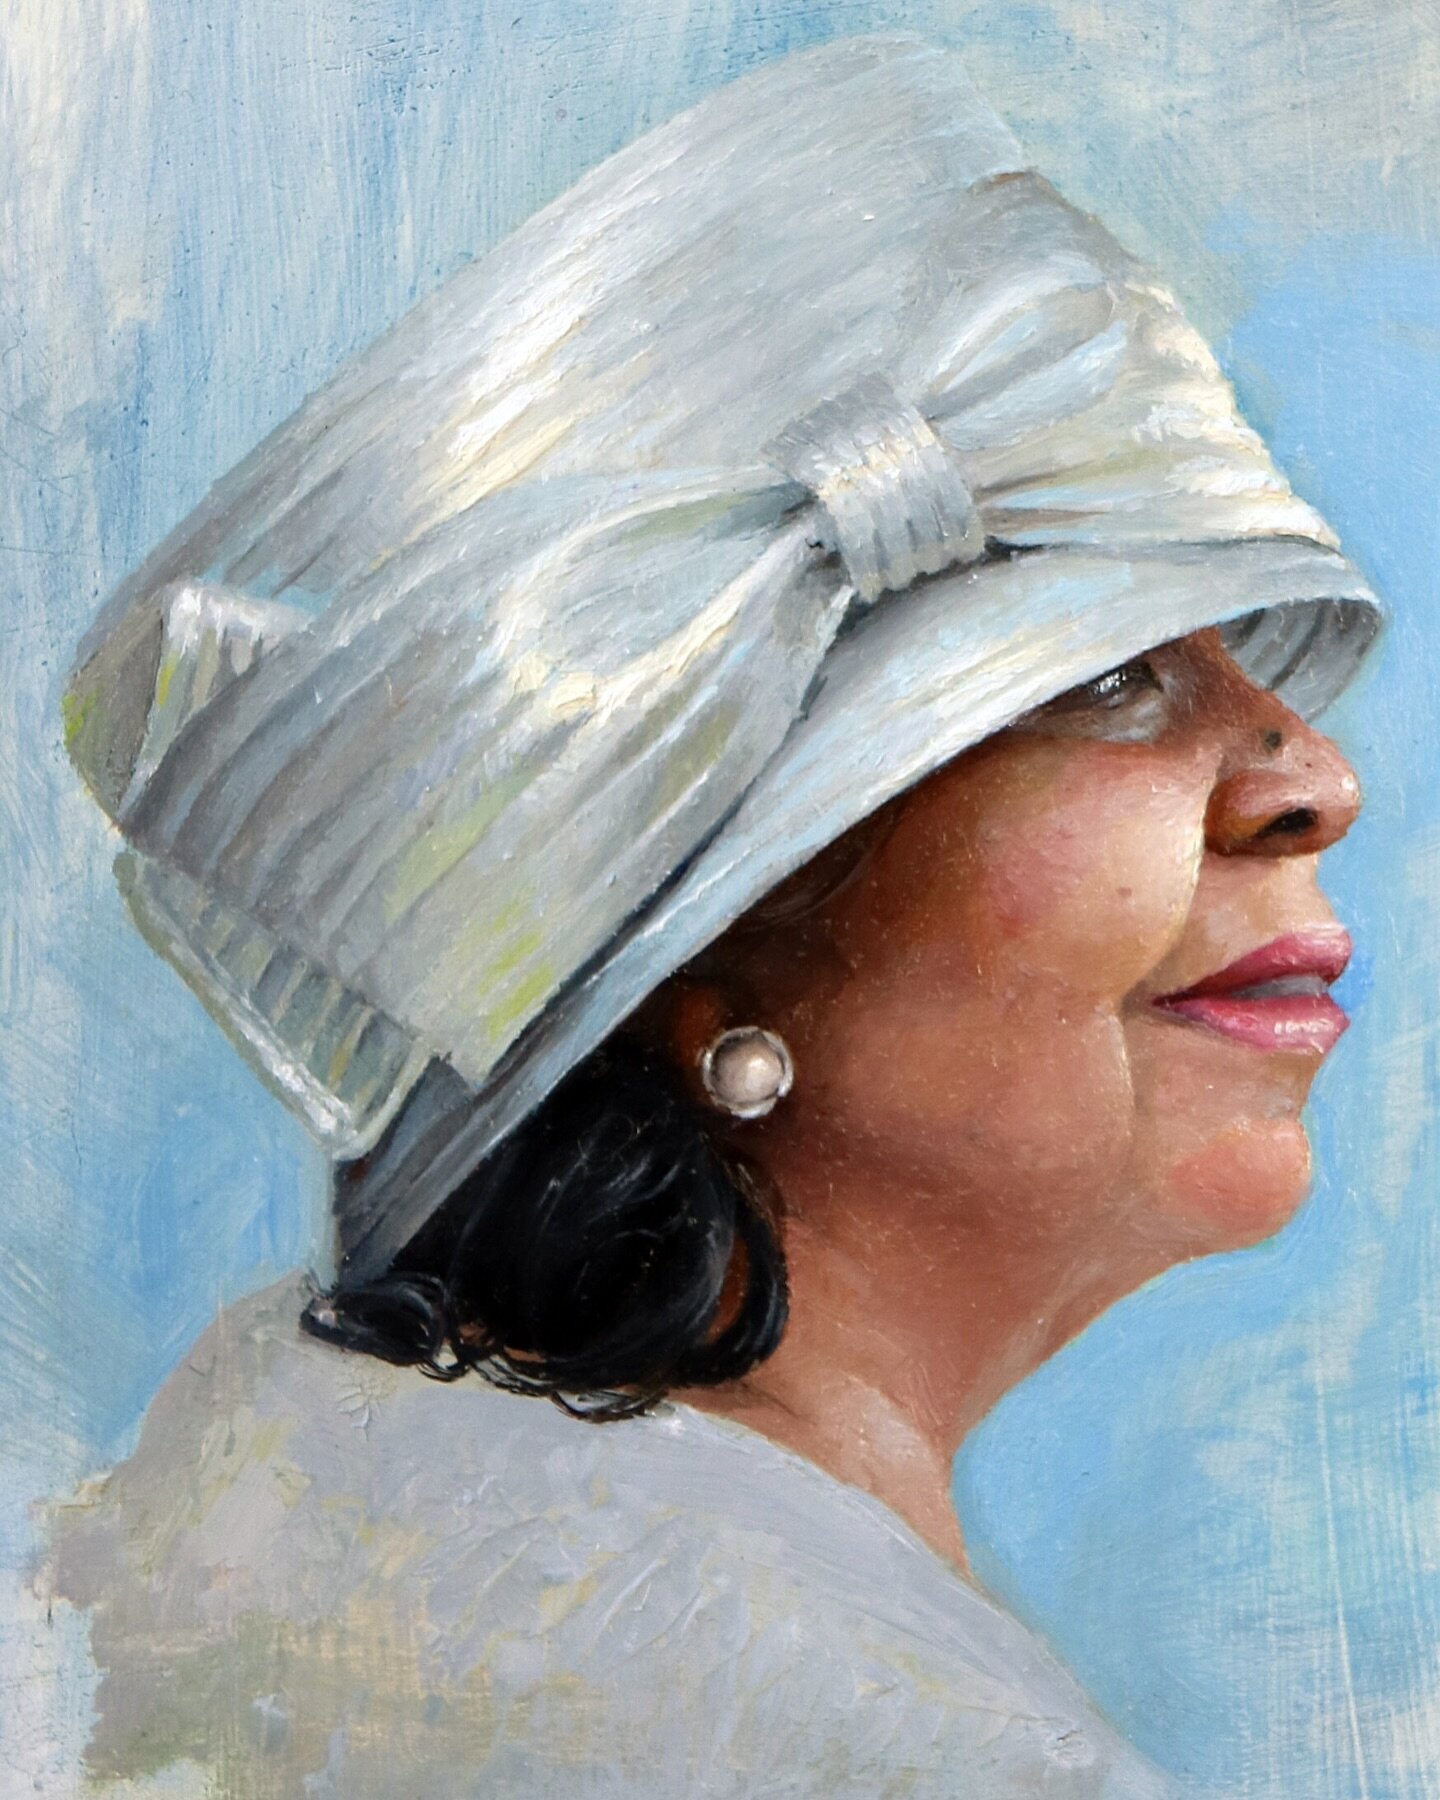 Church Hat No. 13 
5x7, Oil on Aluminum panel

#oil #oilpainting #oilonpanel #realism #paint #painting #paintings